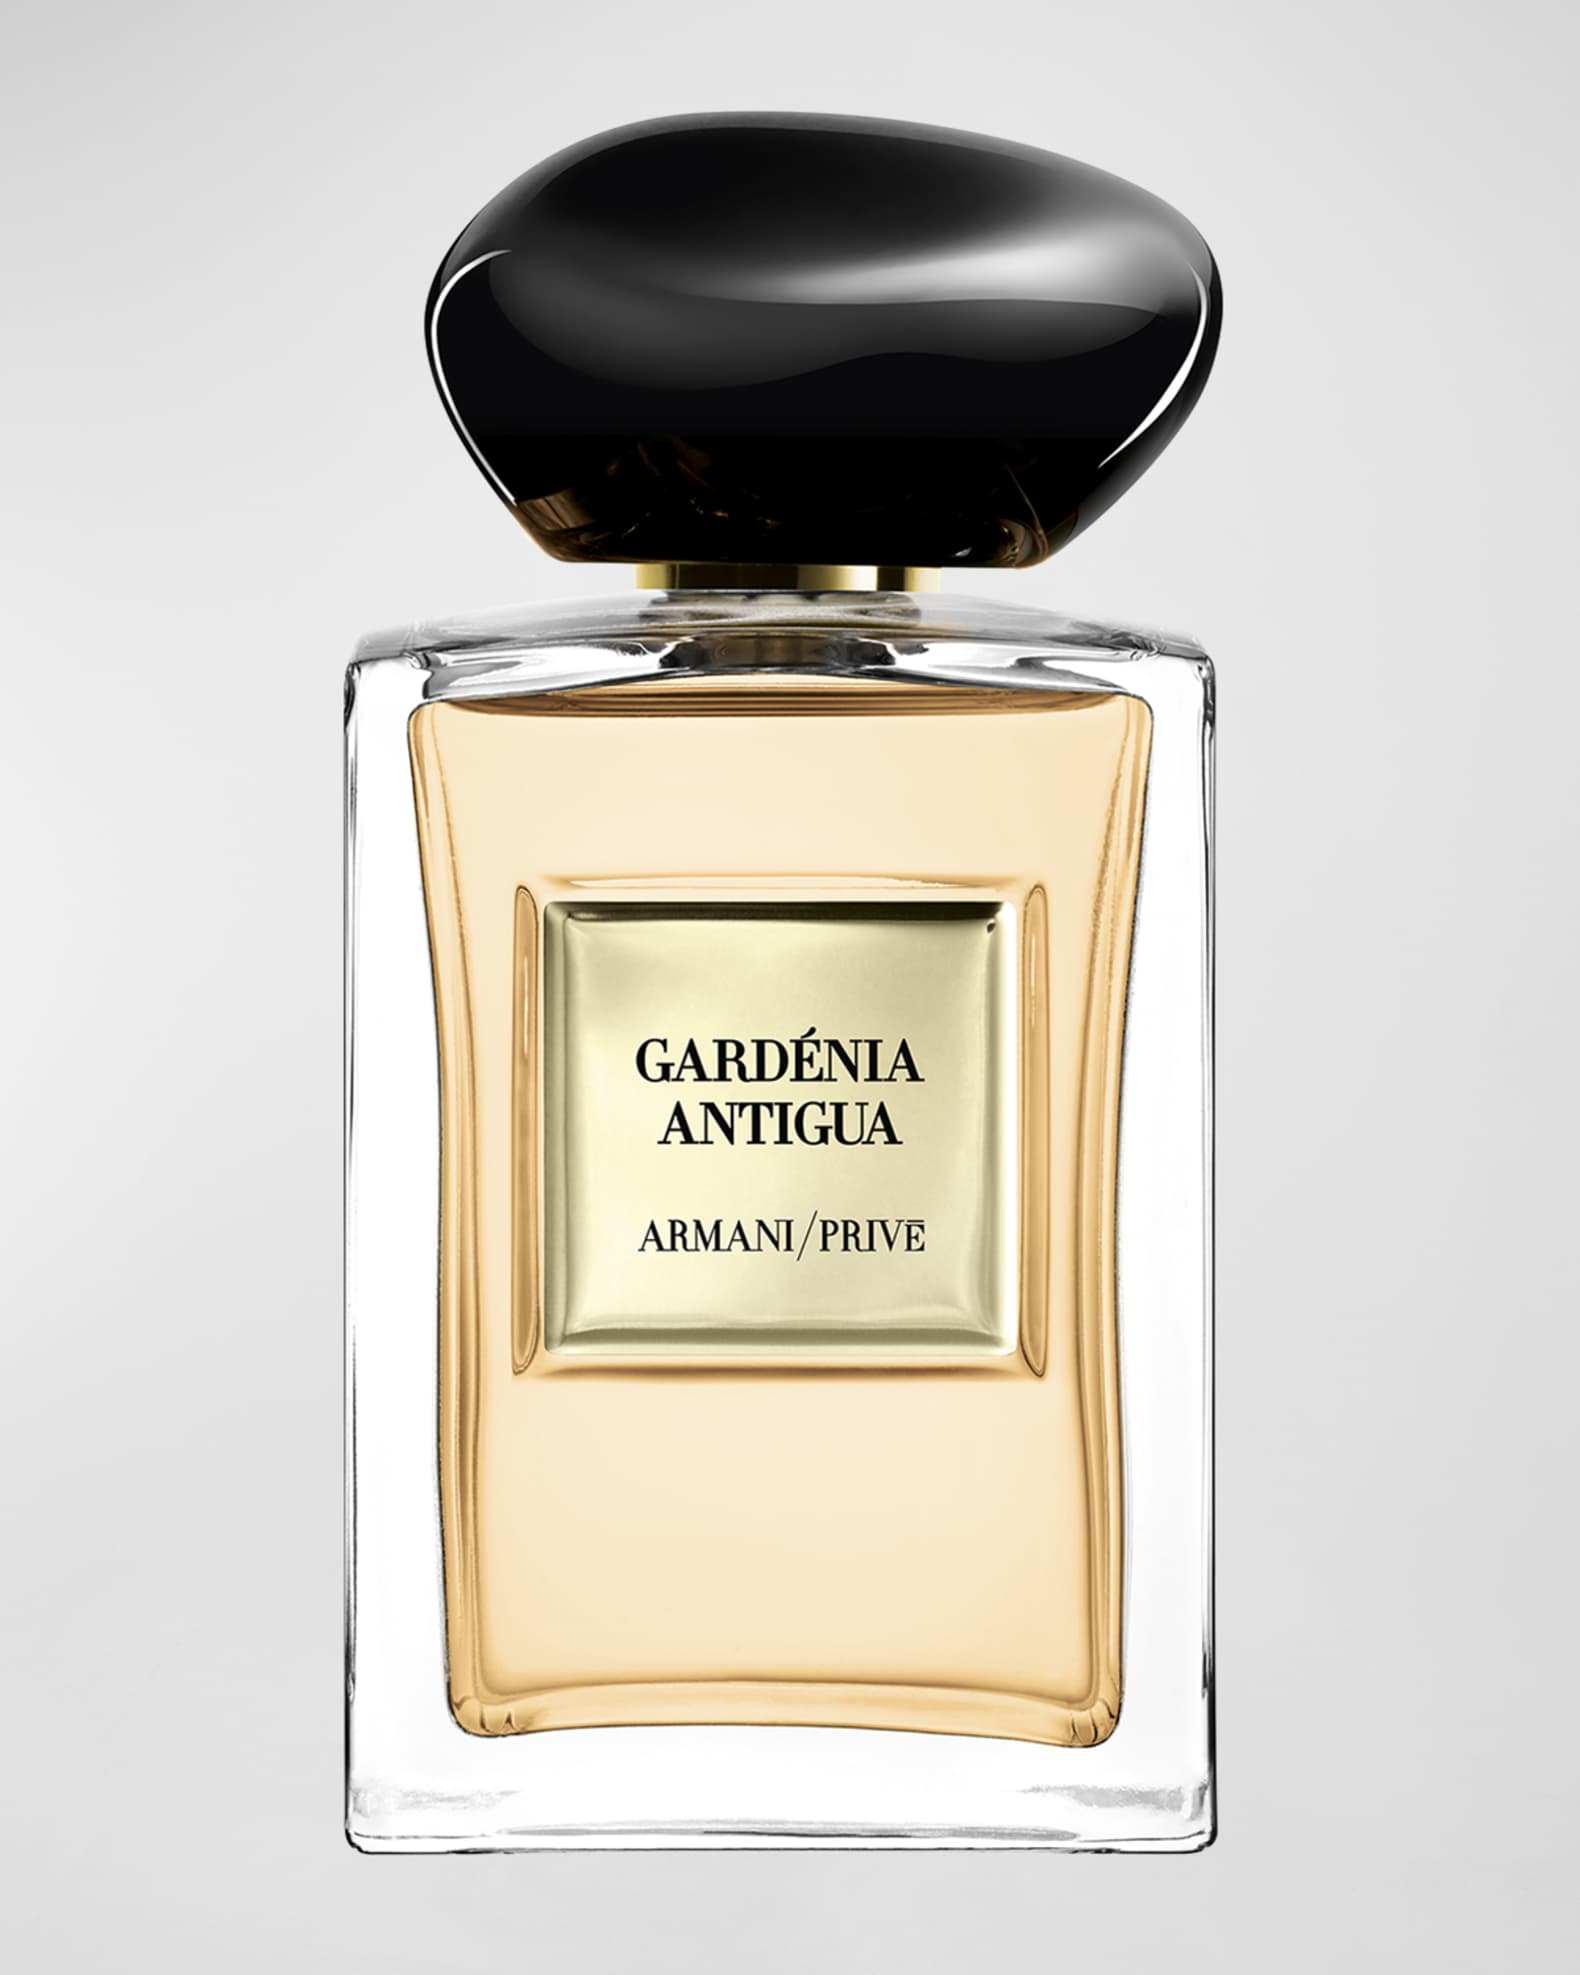 Chanel Gardenia Les Exclusifs Vintage and Modern : Perfume Review